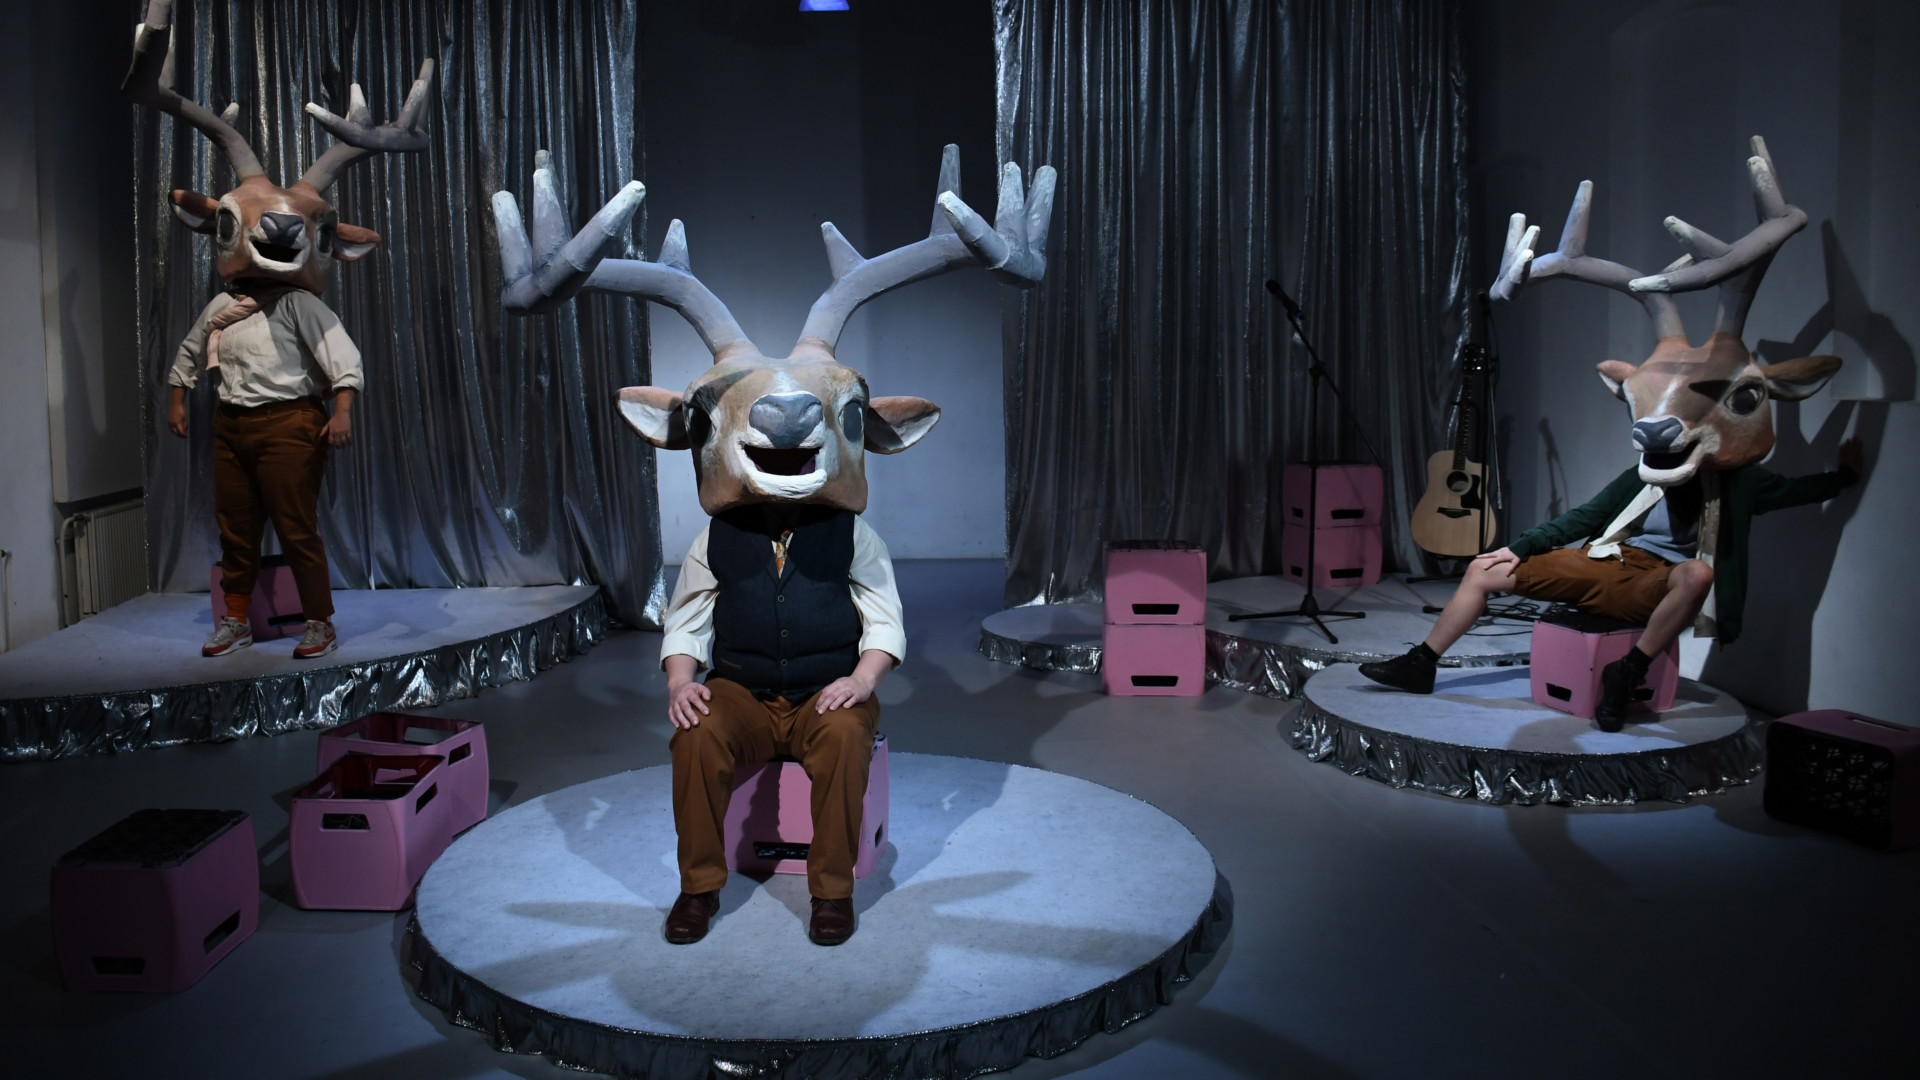 Scene photo of a performance: three actors wear deer masks with antlers and are on separate bases.